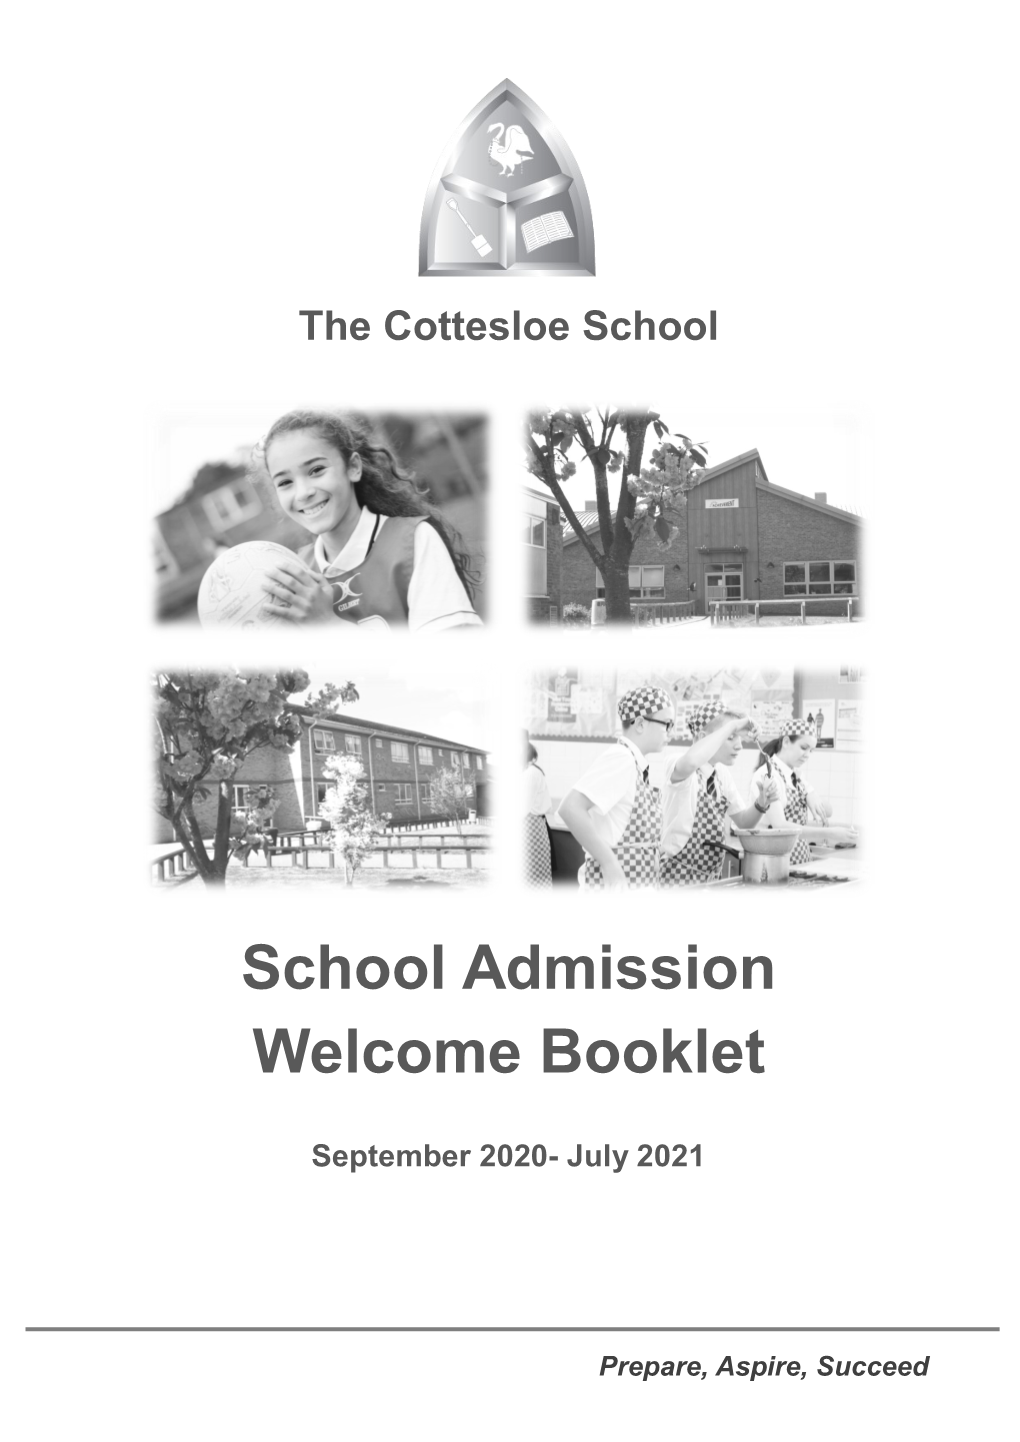 School Admission Welcome Booklet